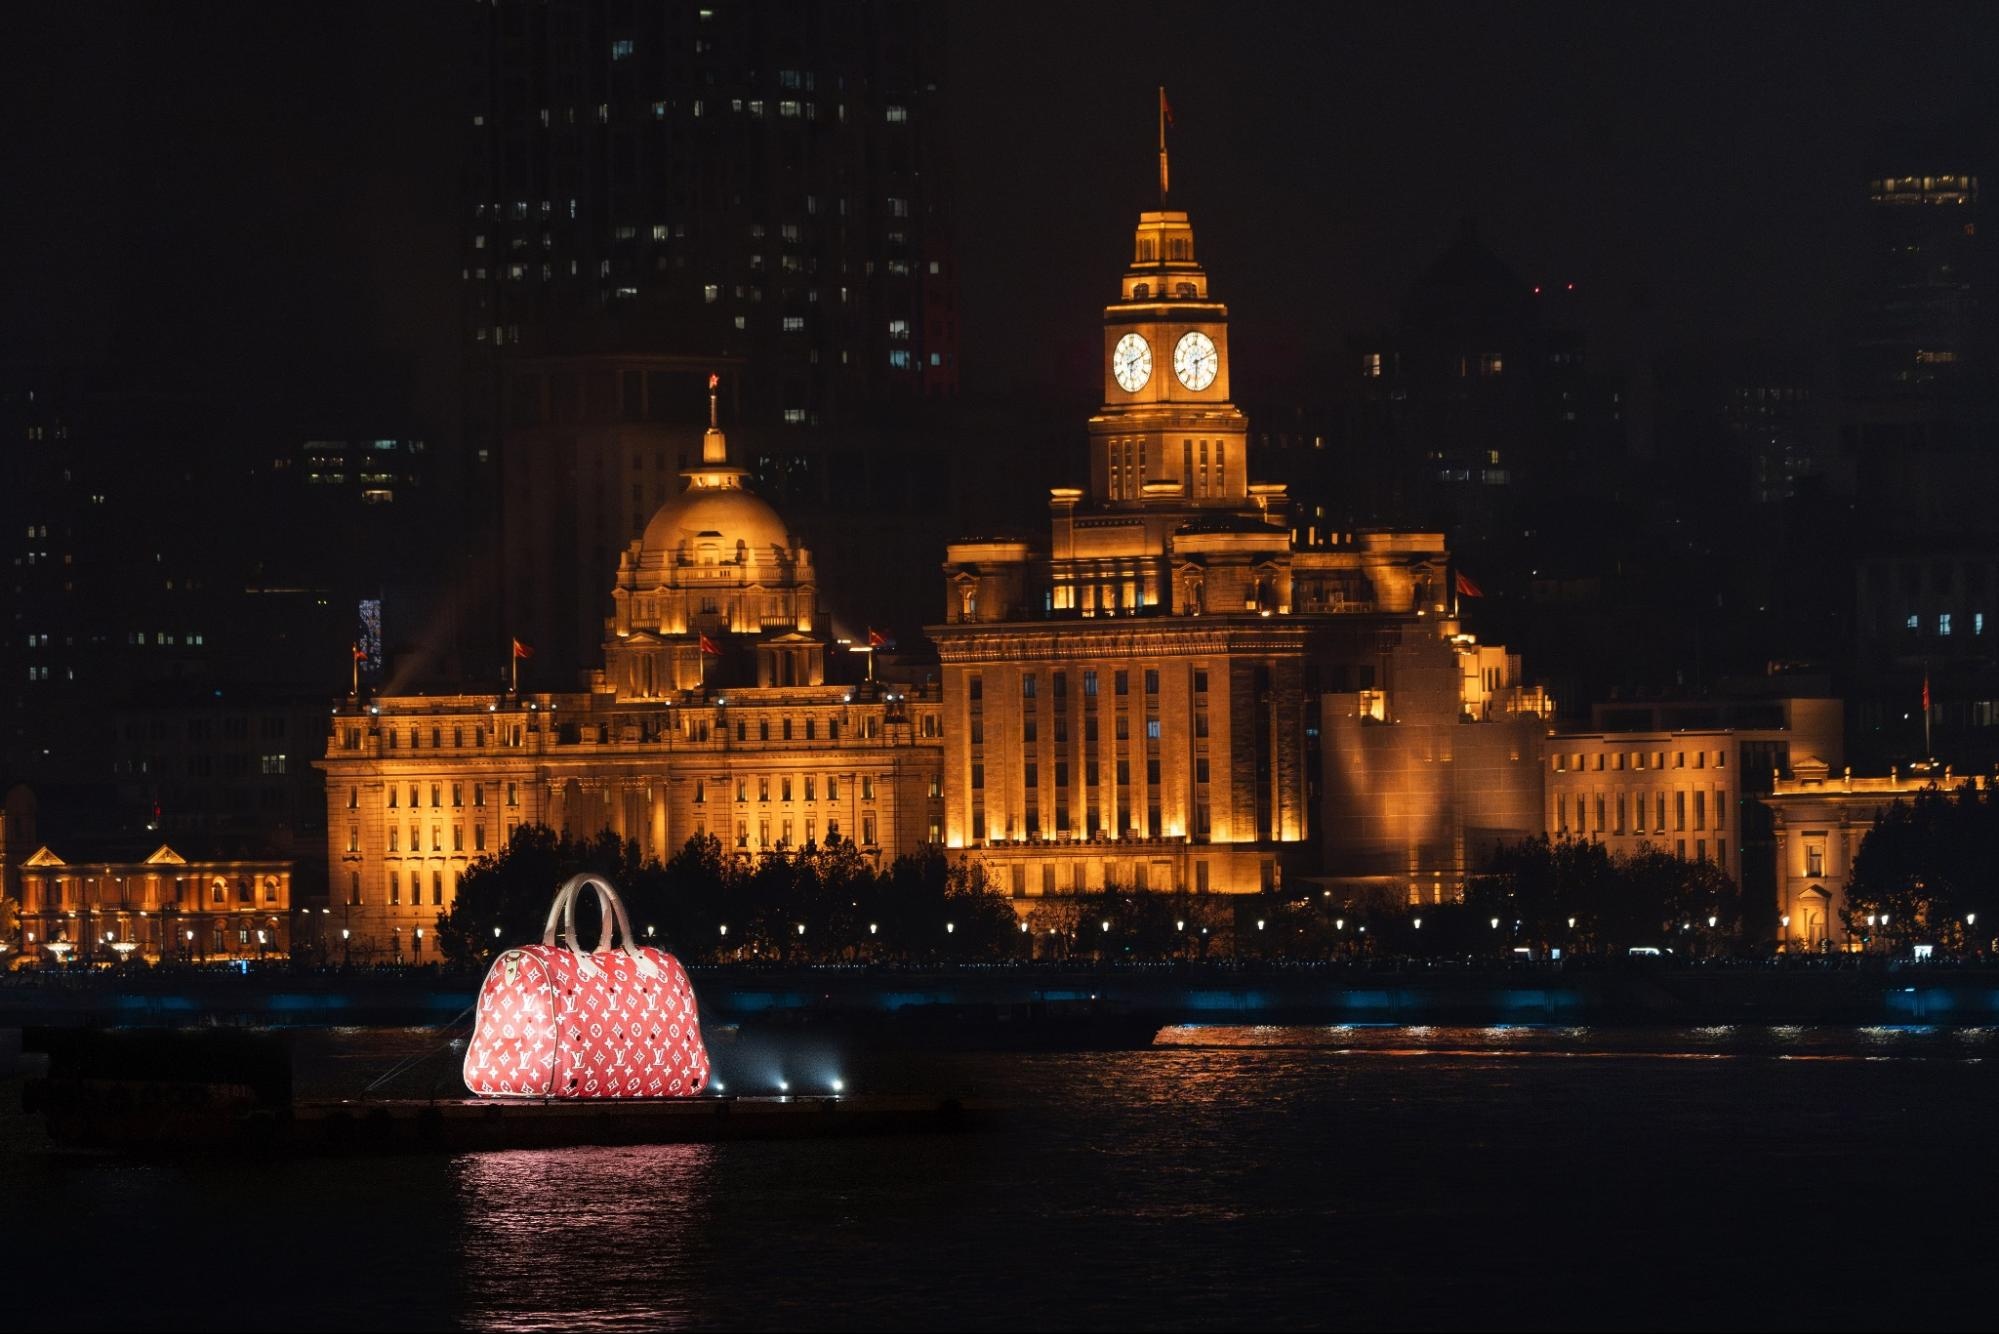 Louis Vuitton unveiled an inflatable sculpture of its iconic Speedy handbag in Shanghai. Photo: Louis Vuitton
